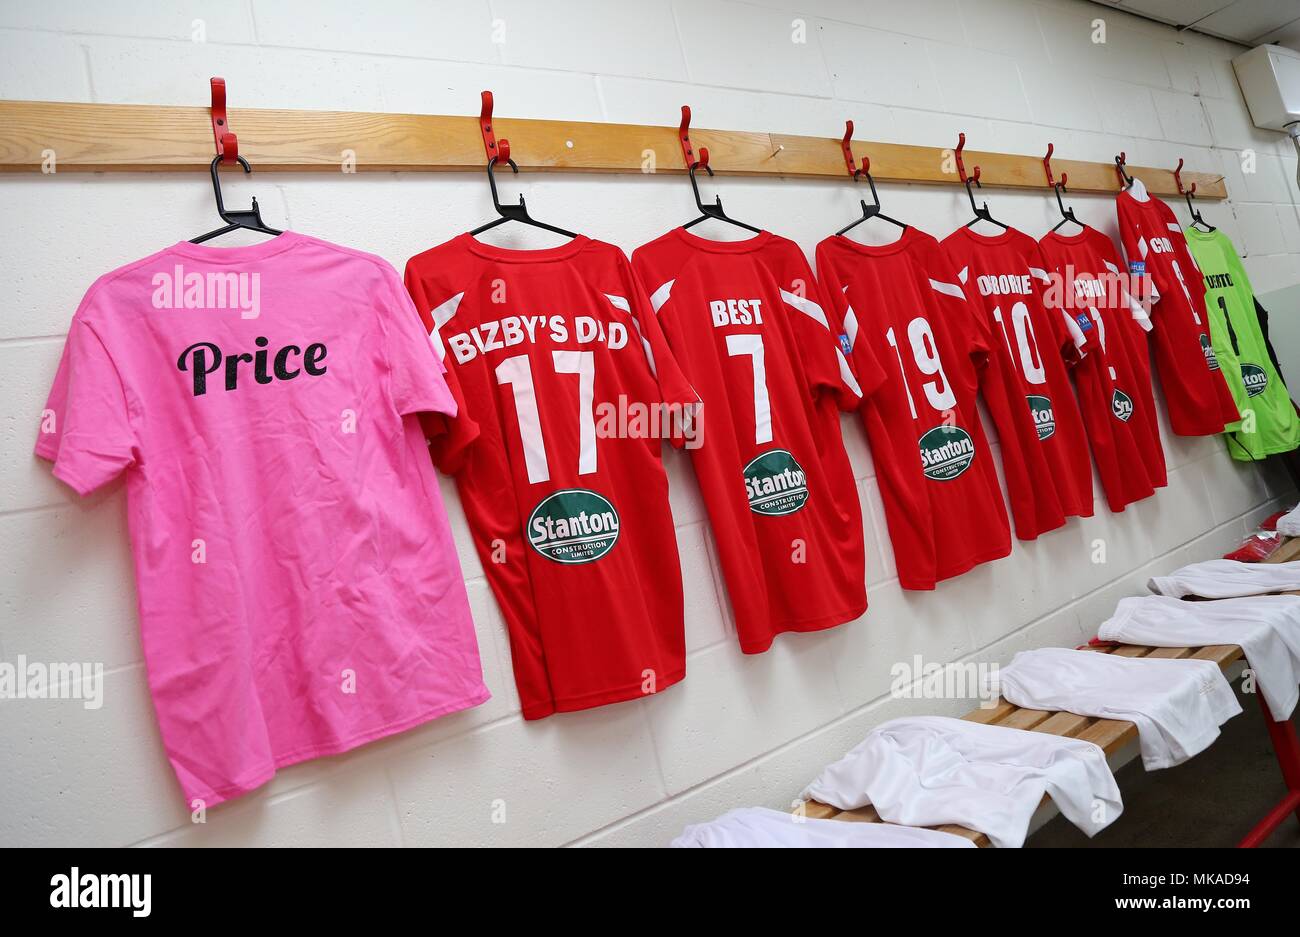 Crawley, Sussex UK 7th May 2018 -  Katie Price's T shirt seen before a Celebrity Football Match at Crawley Town Football Club. The money raised will go to Buzby 4 who has quadriplegic cerebral palsy and needs surgery to help make him walk unaided. Credit: James Boardman/Alamy Live News Stock Photo